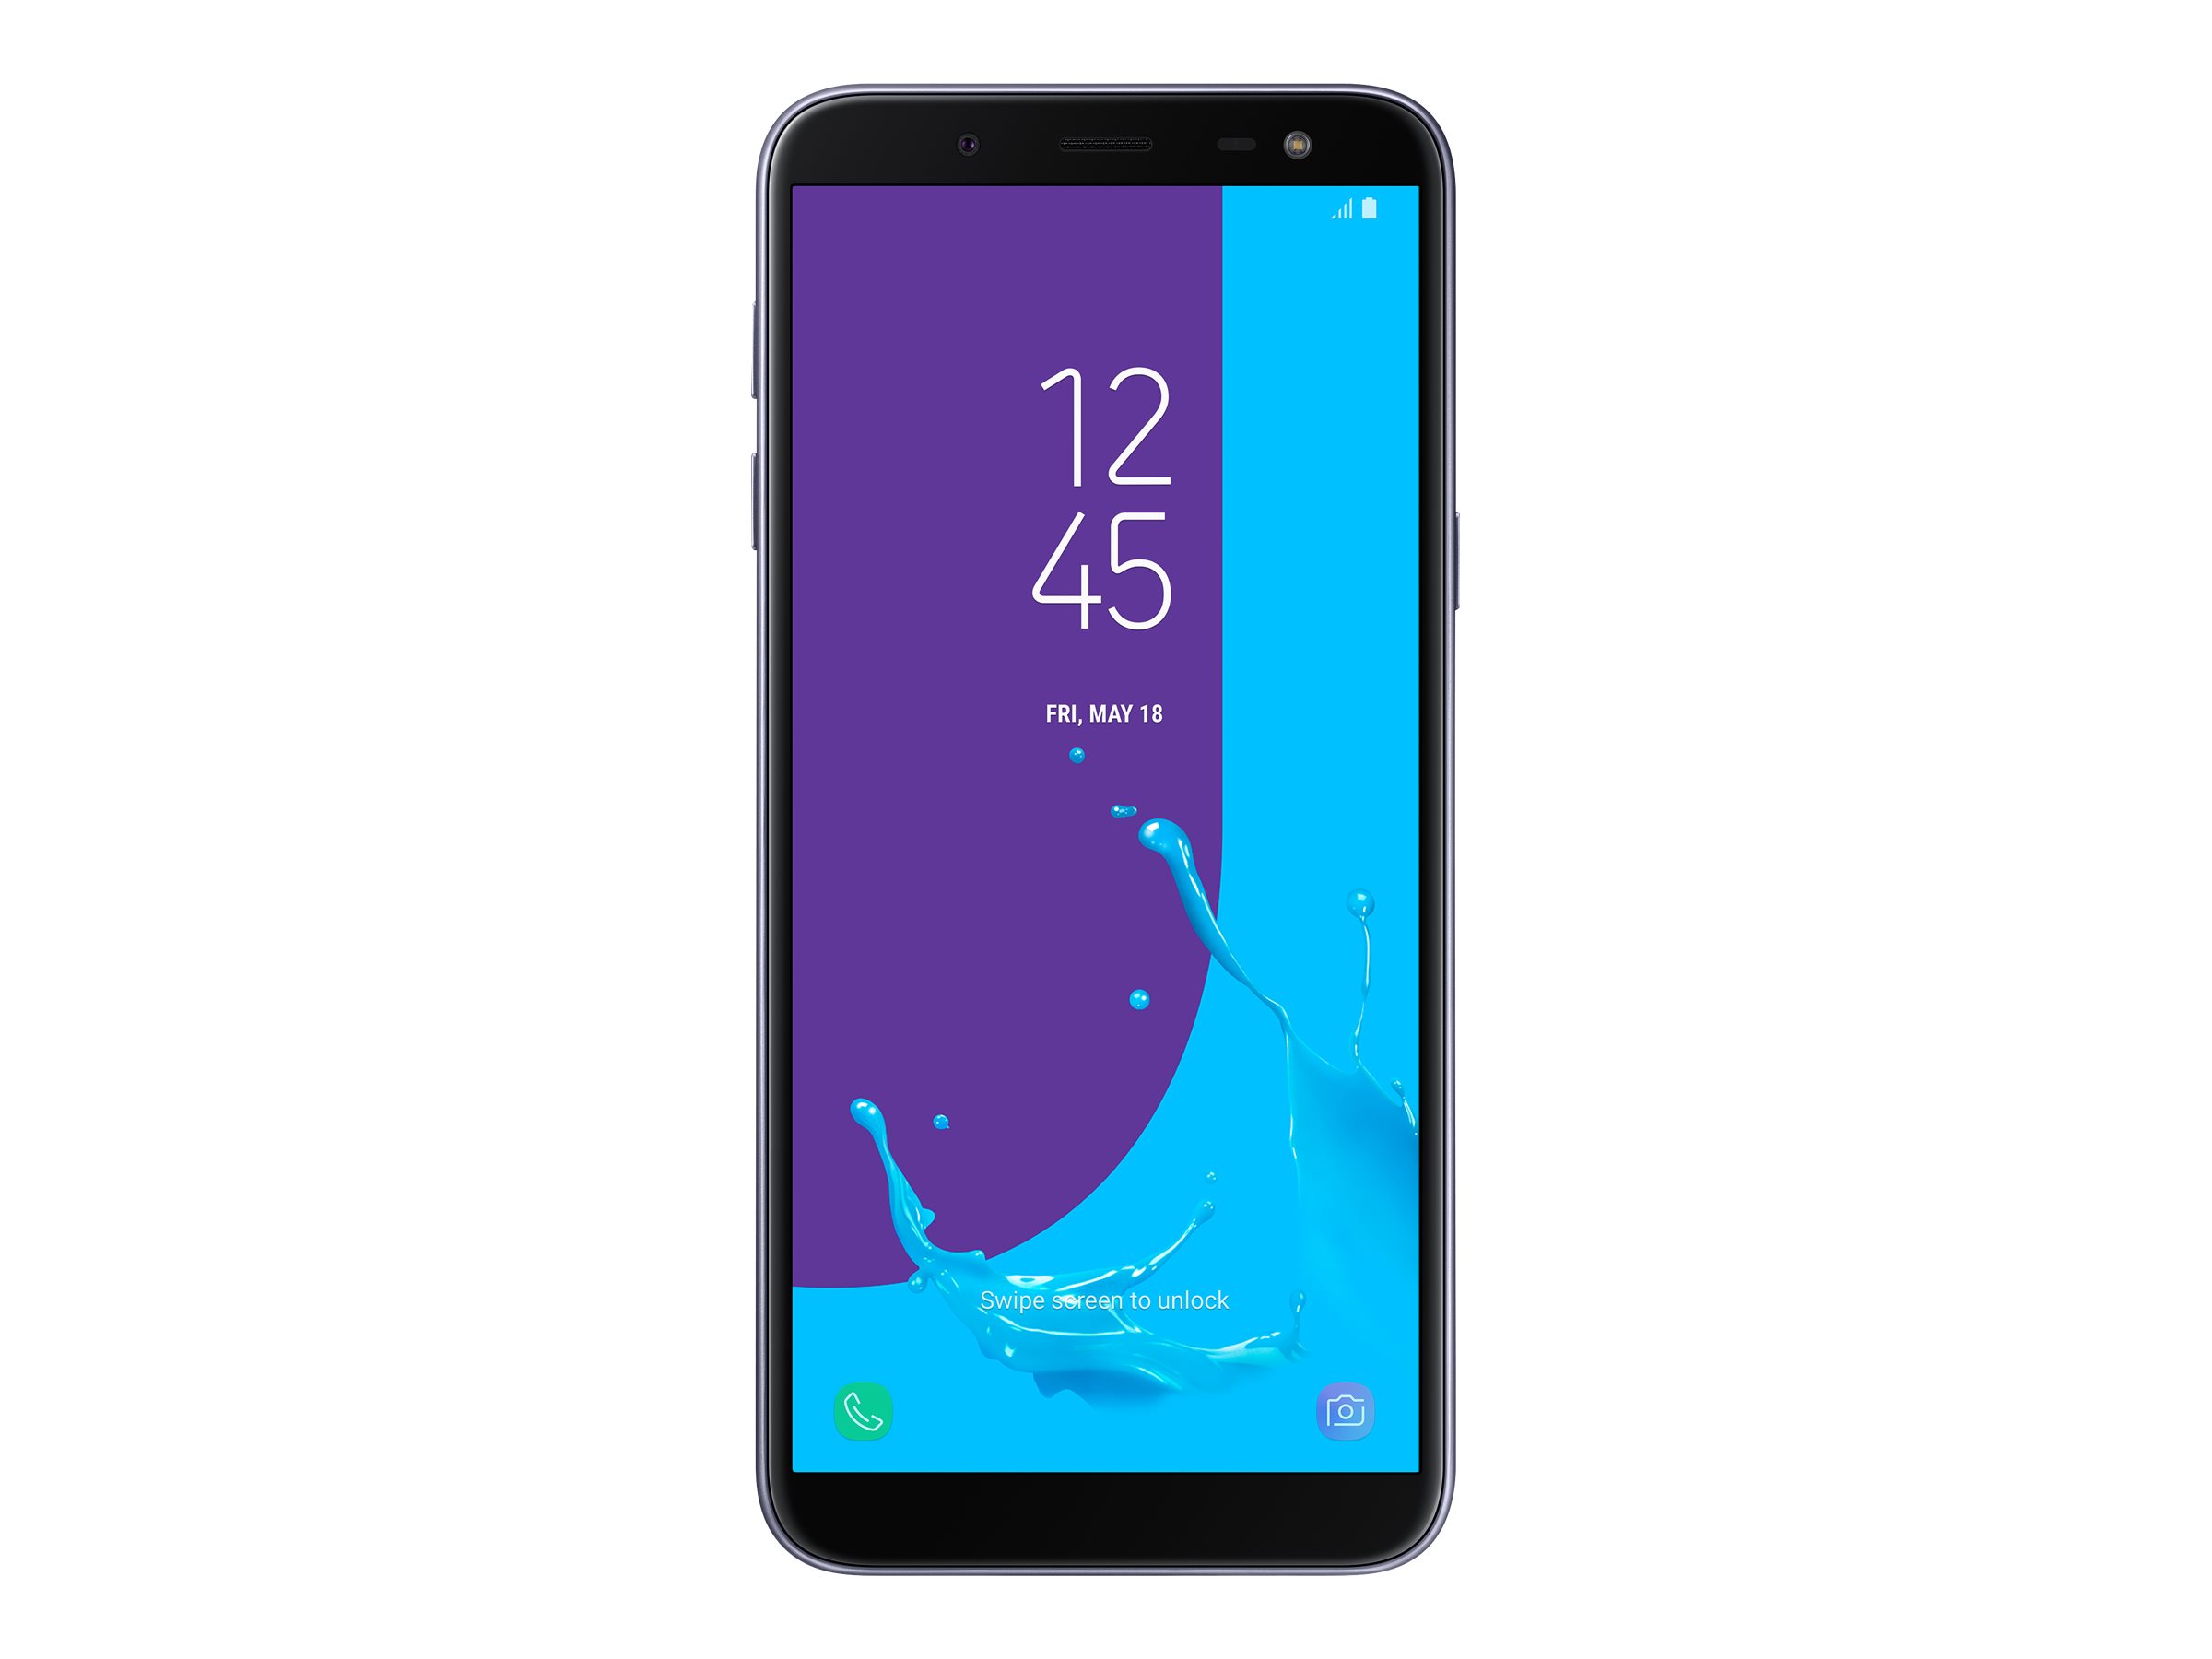 Samsung Galaxy A8 (2018) Technical Specifications